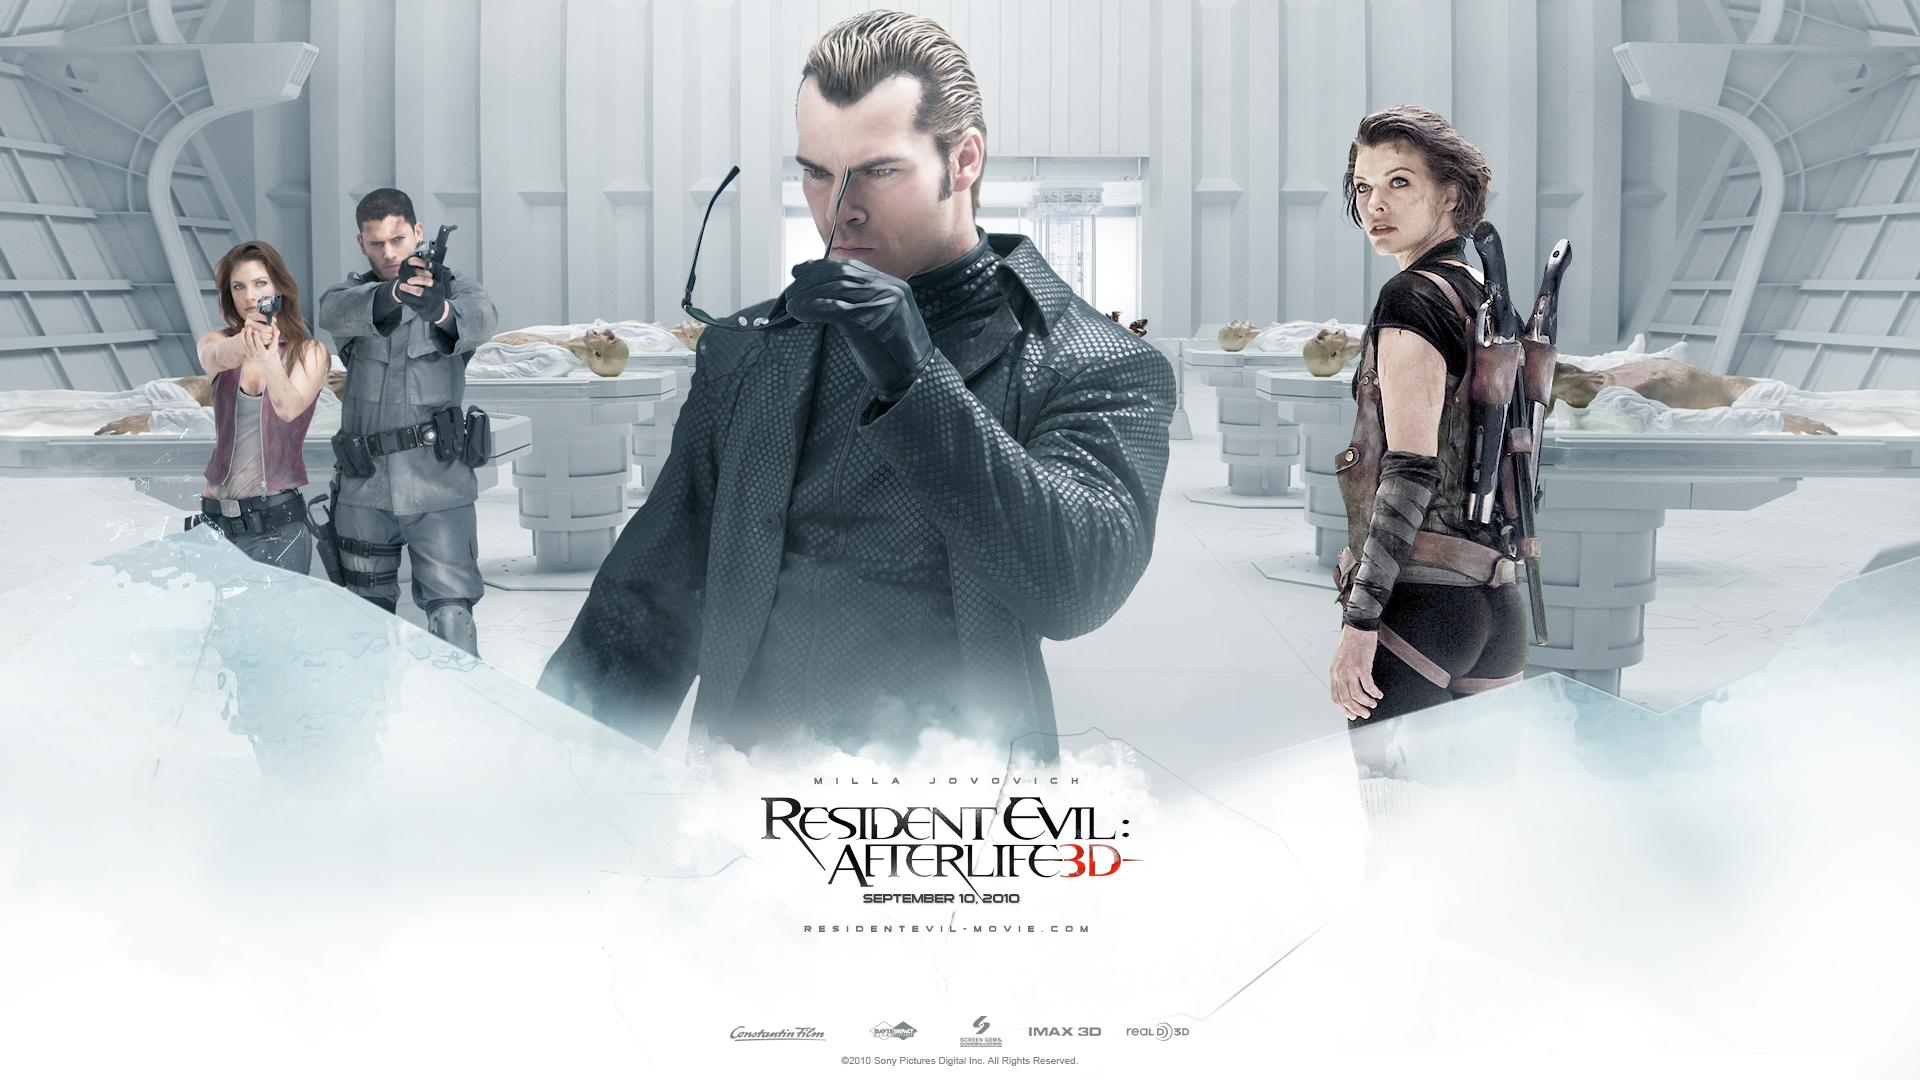 Resident Evil Afterlife (2010) Wallpapers | HD Wallpapers